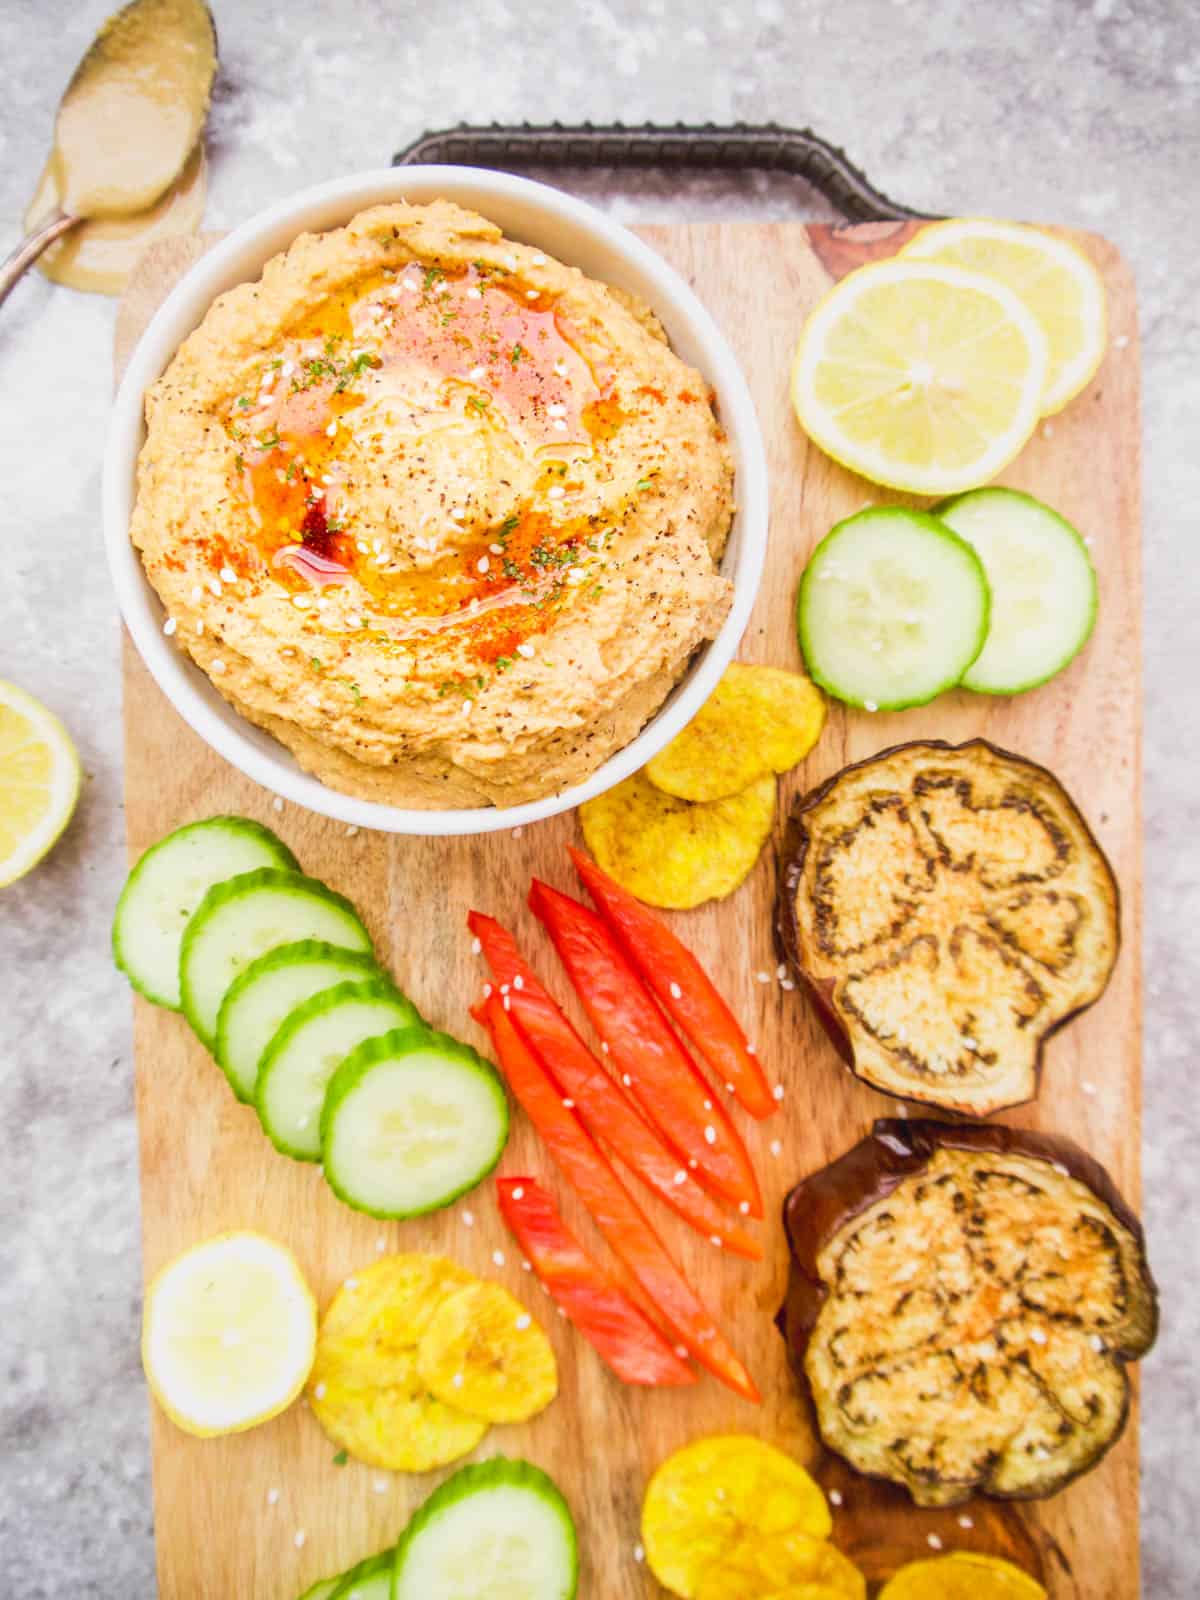 Paleo hummus on a serving tray with veggies and chips to dunk into it.